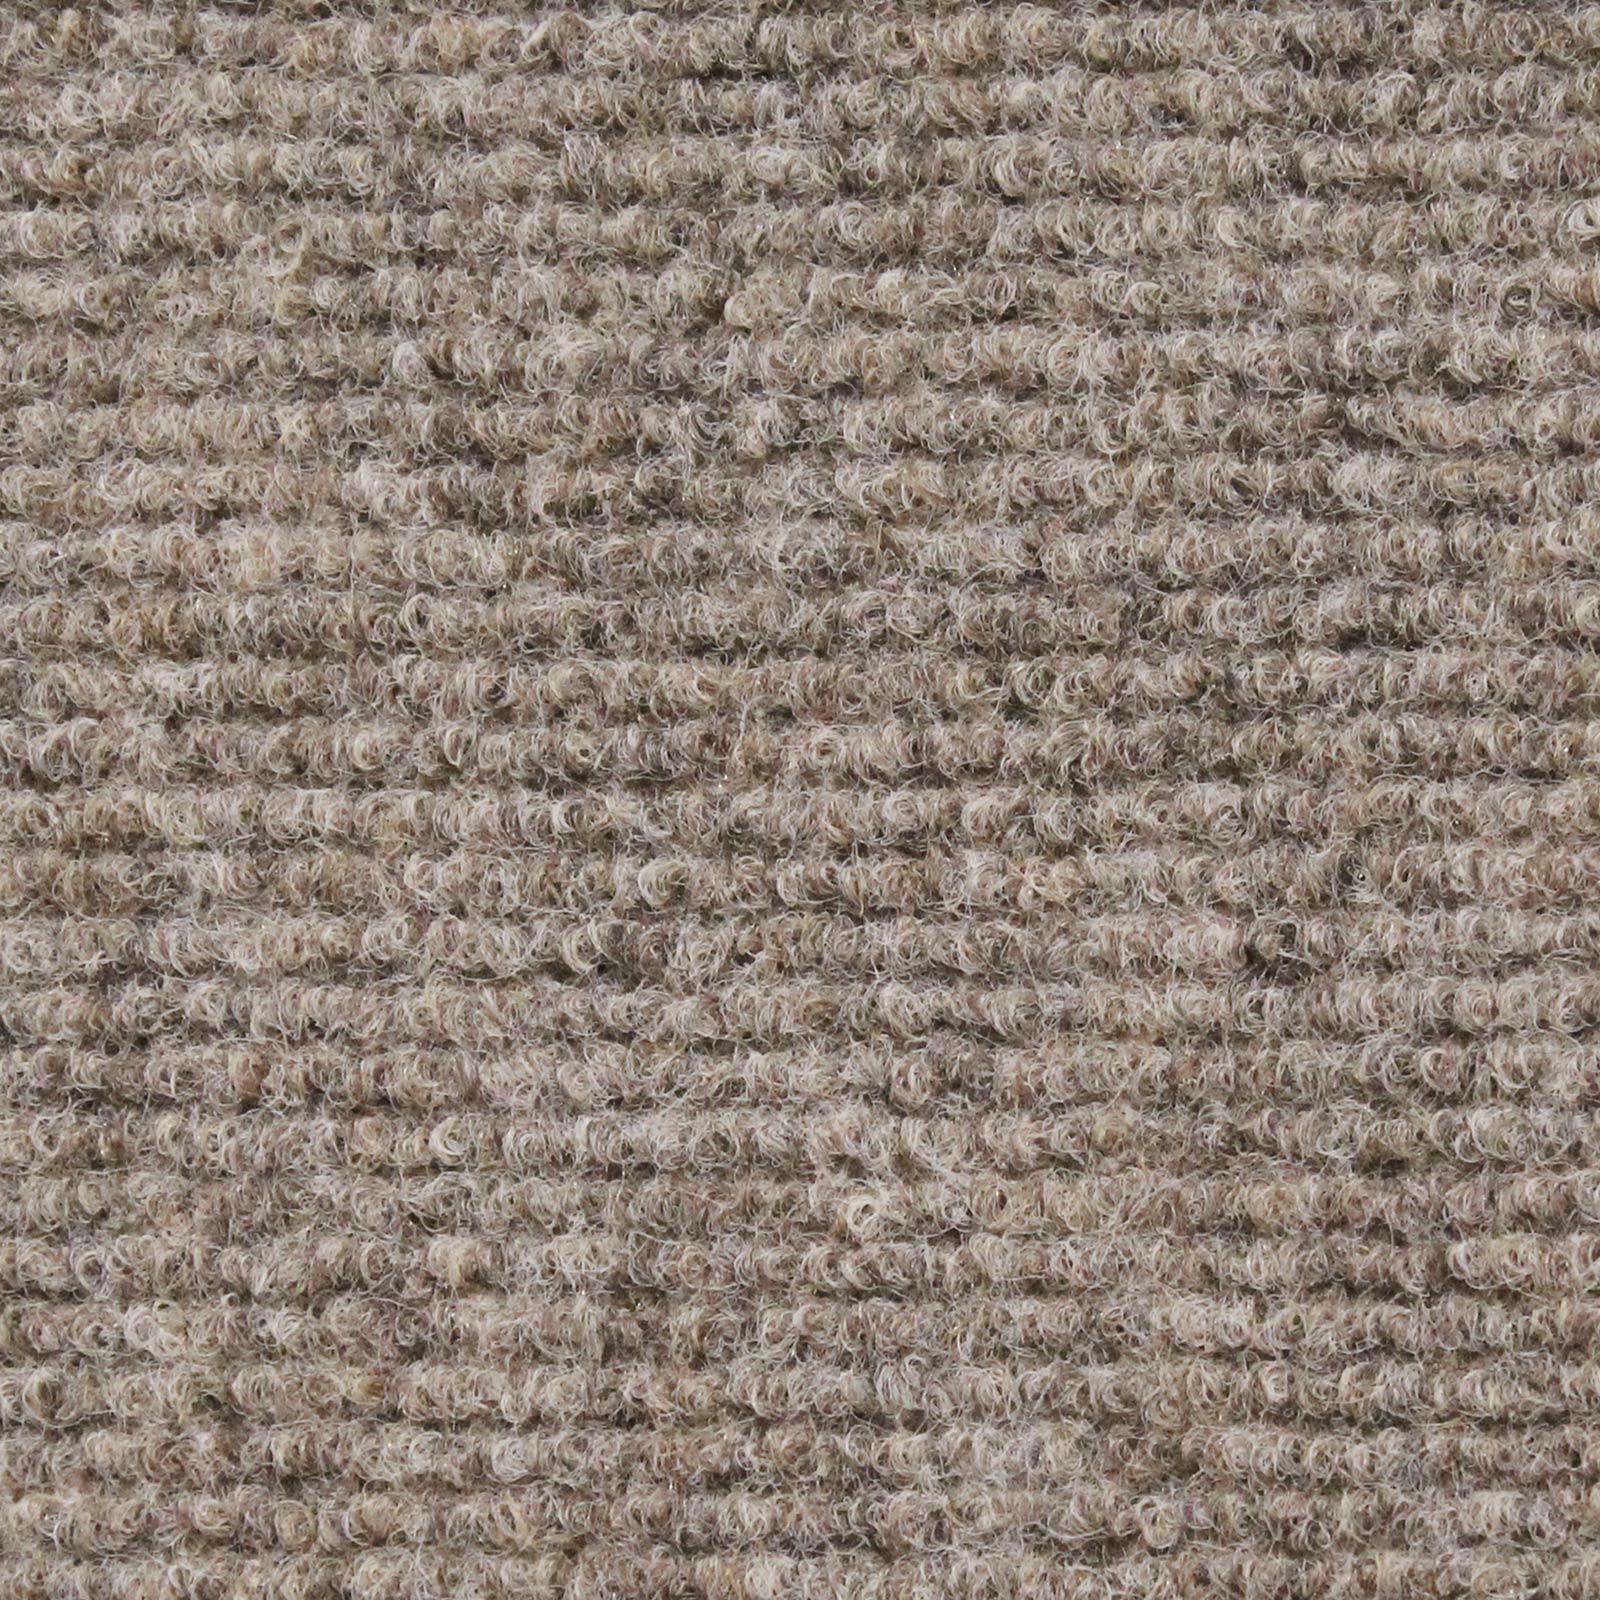 House, Home and More Indoor/Outdoor Carpet - Brown - 6' x 15'